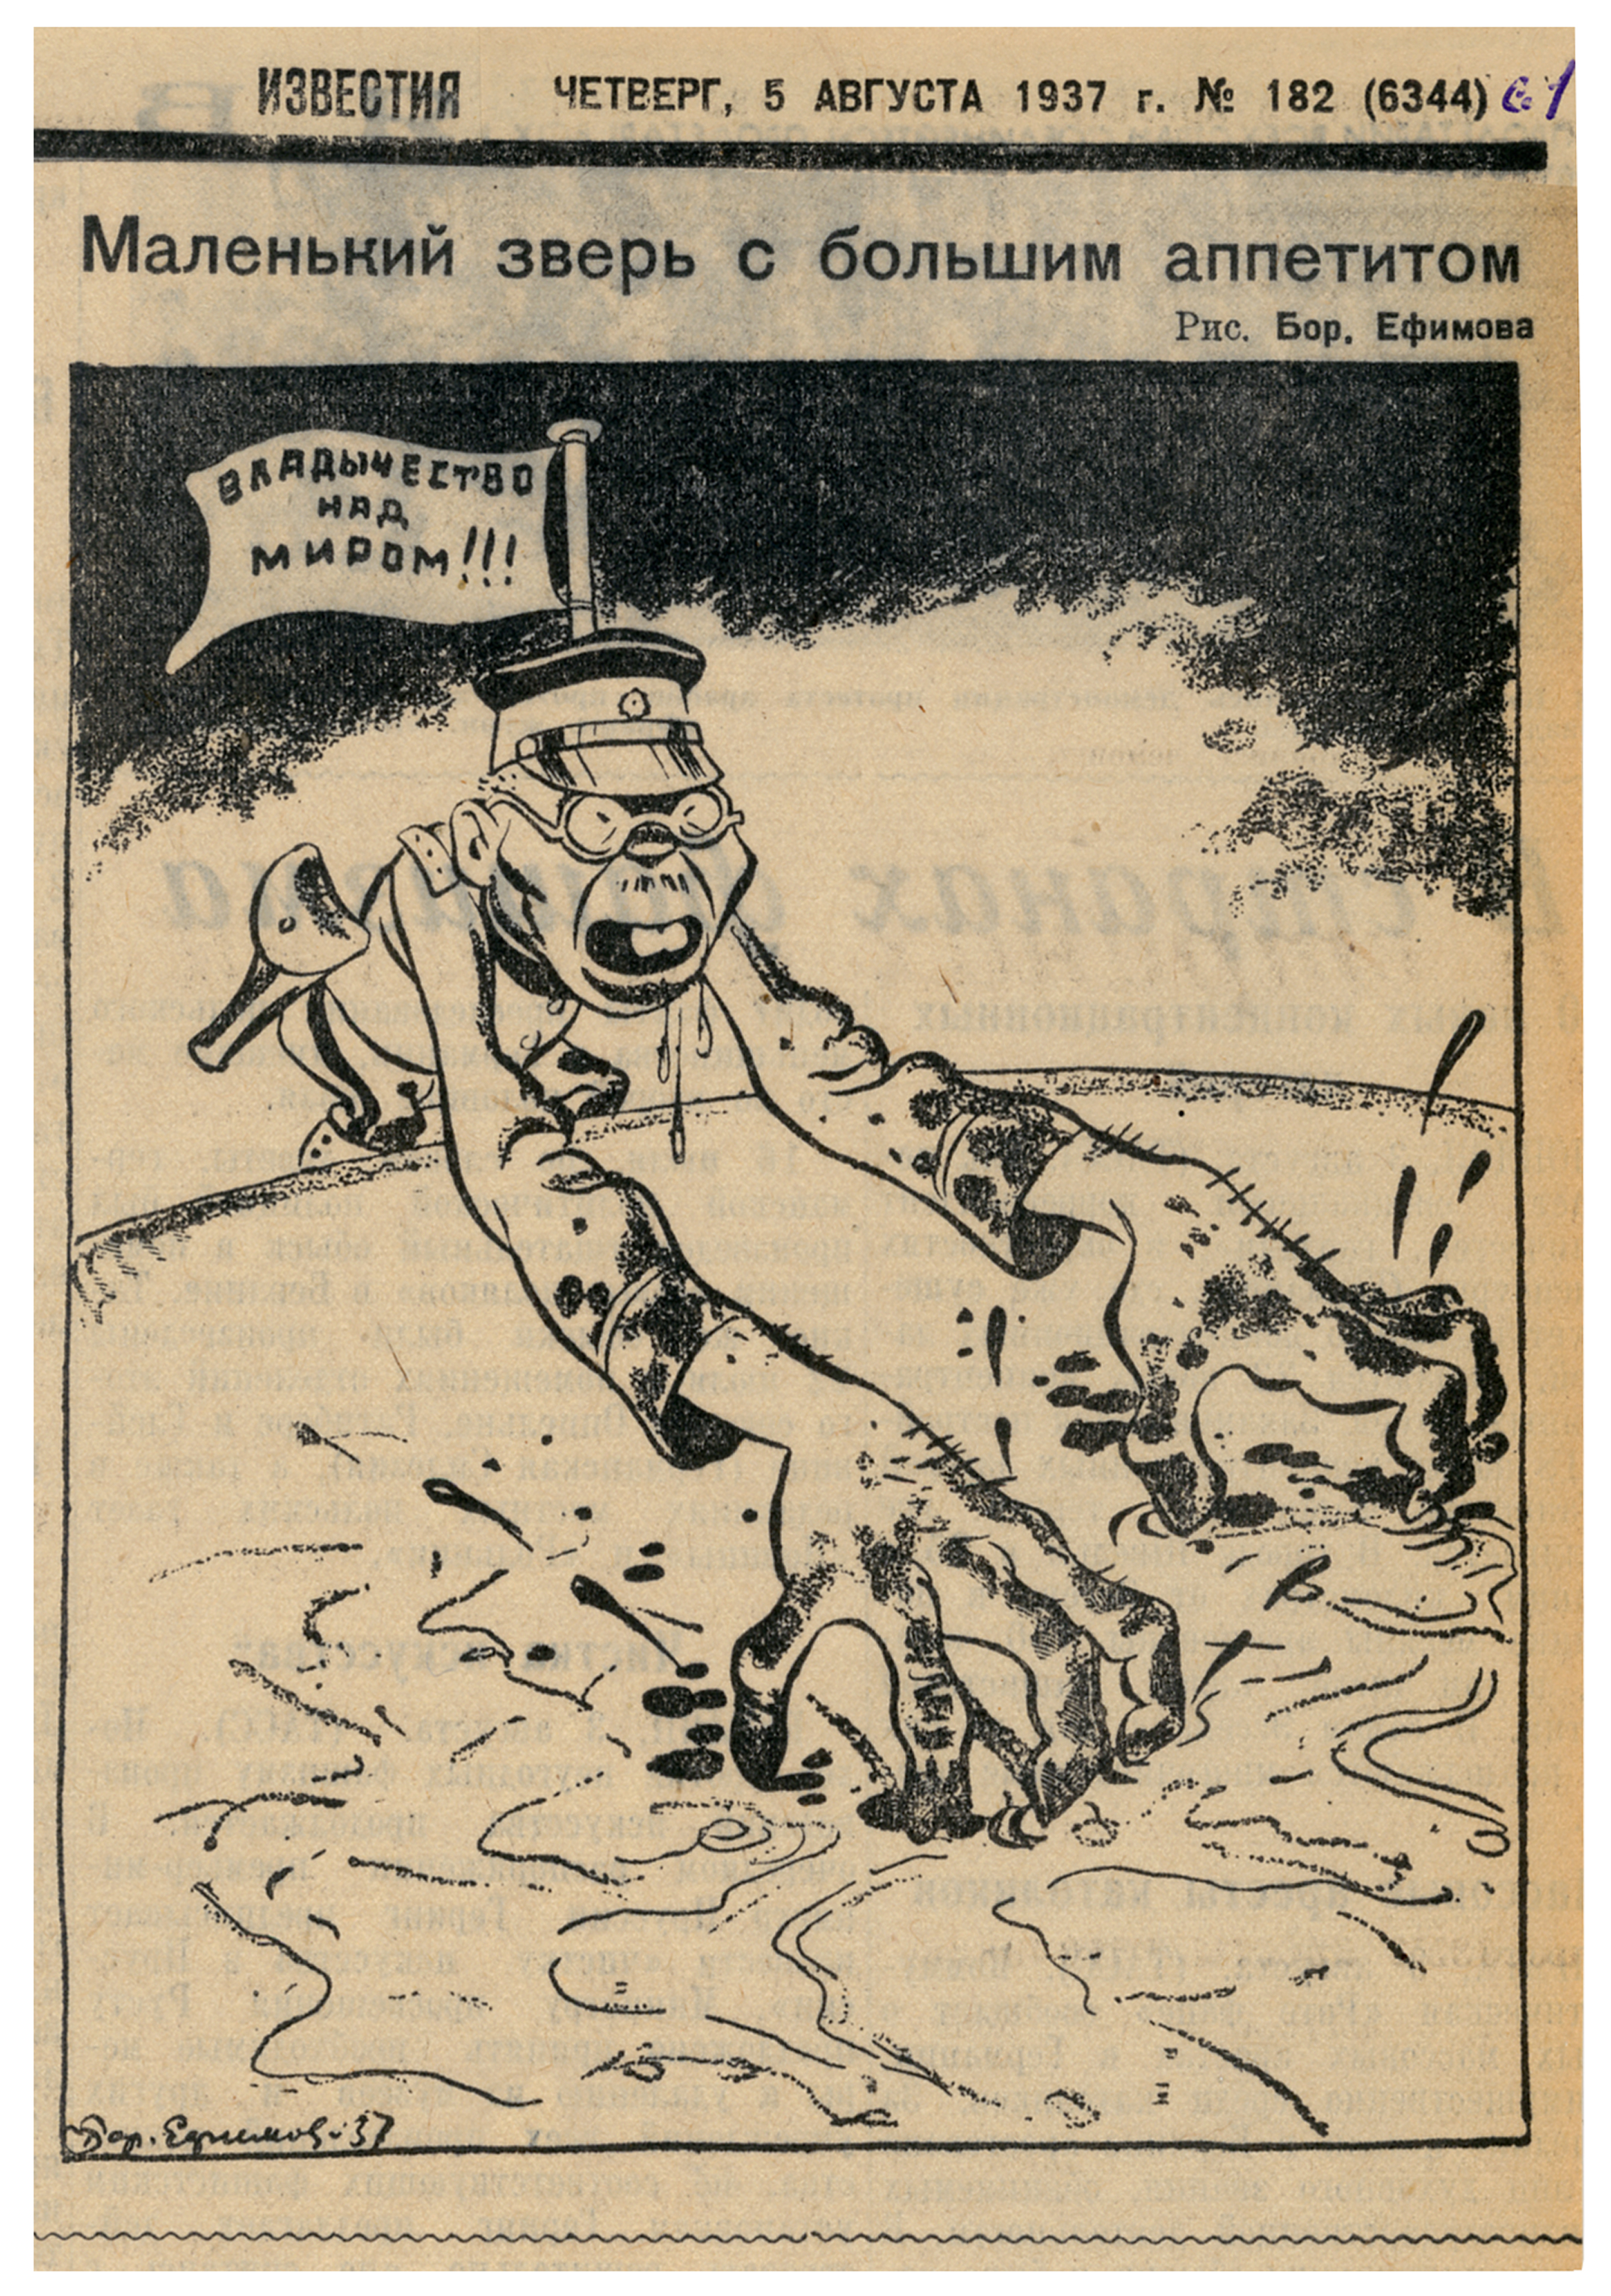 Efimov's 1937 cartoon: 'Interventionists Caught Red-Handed.'